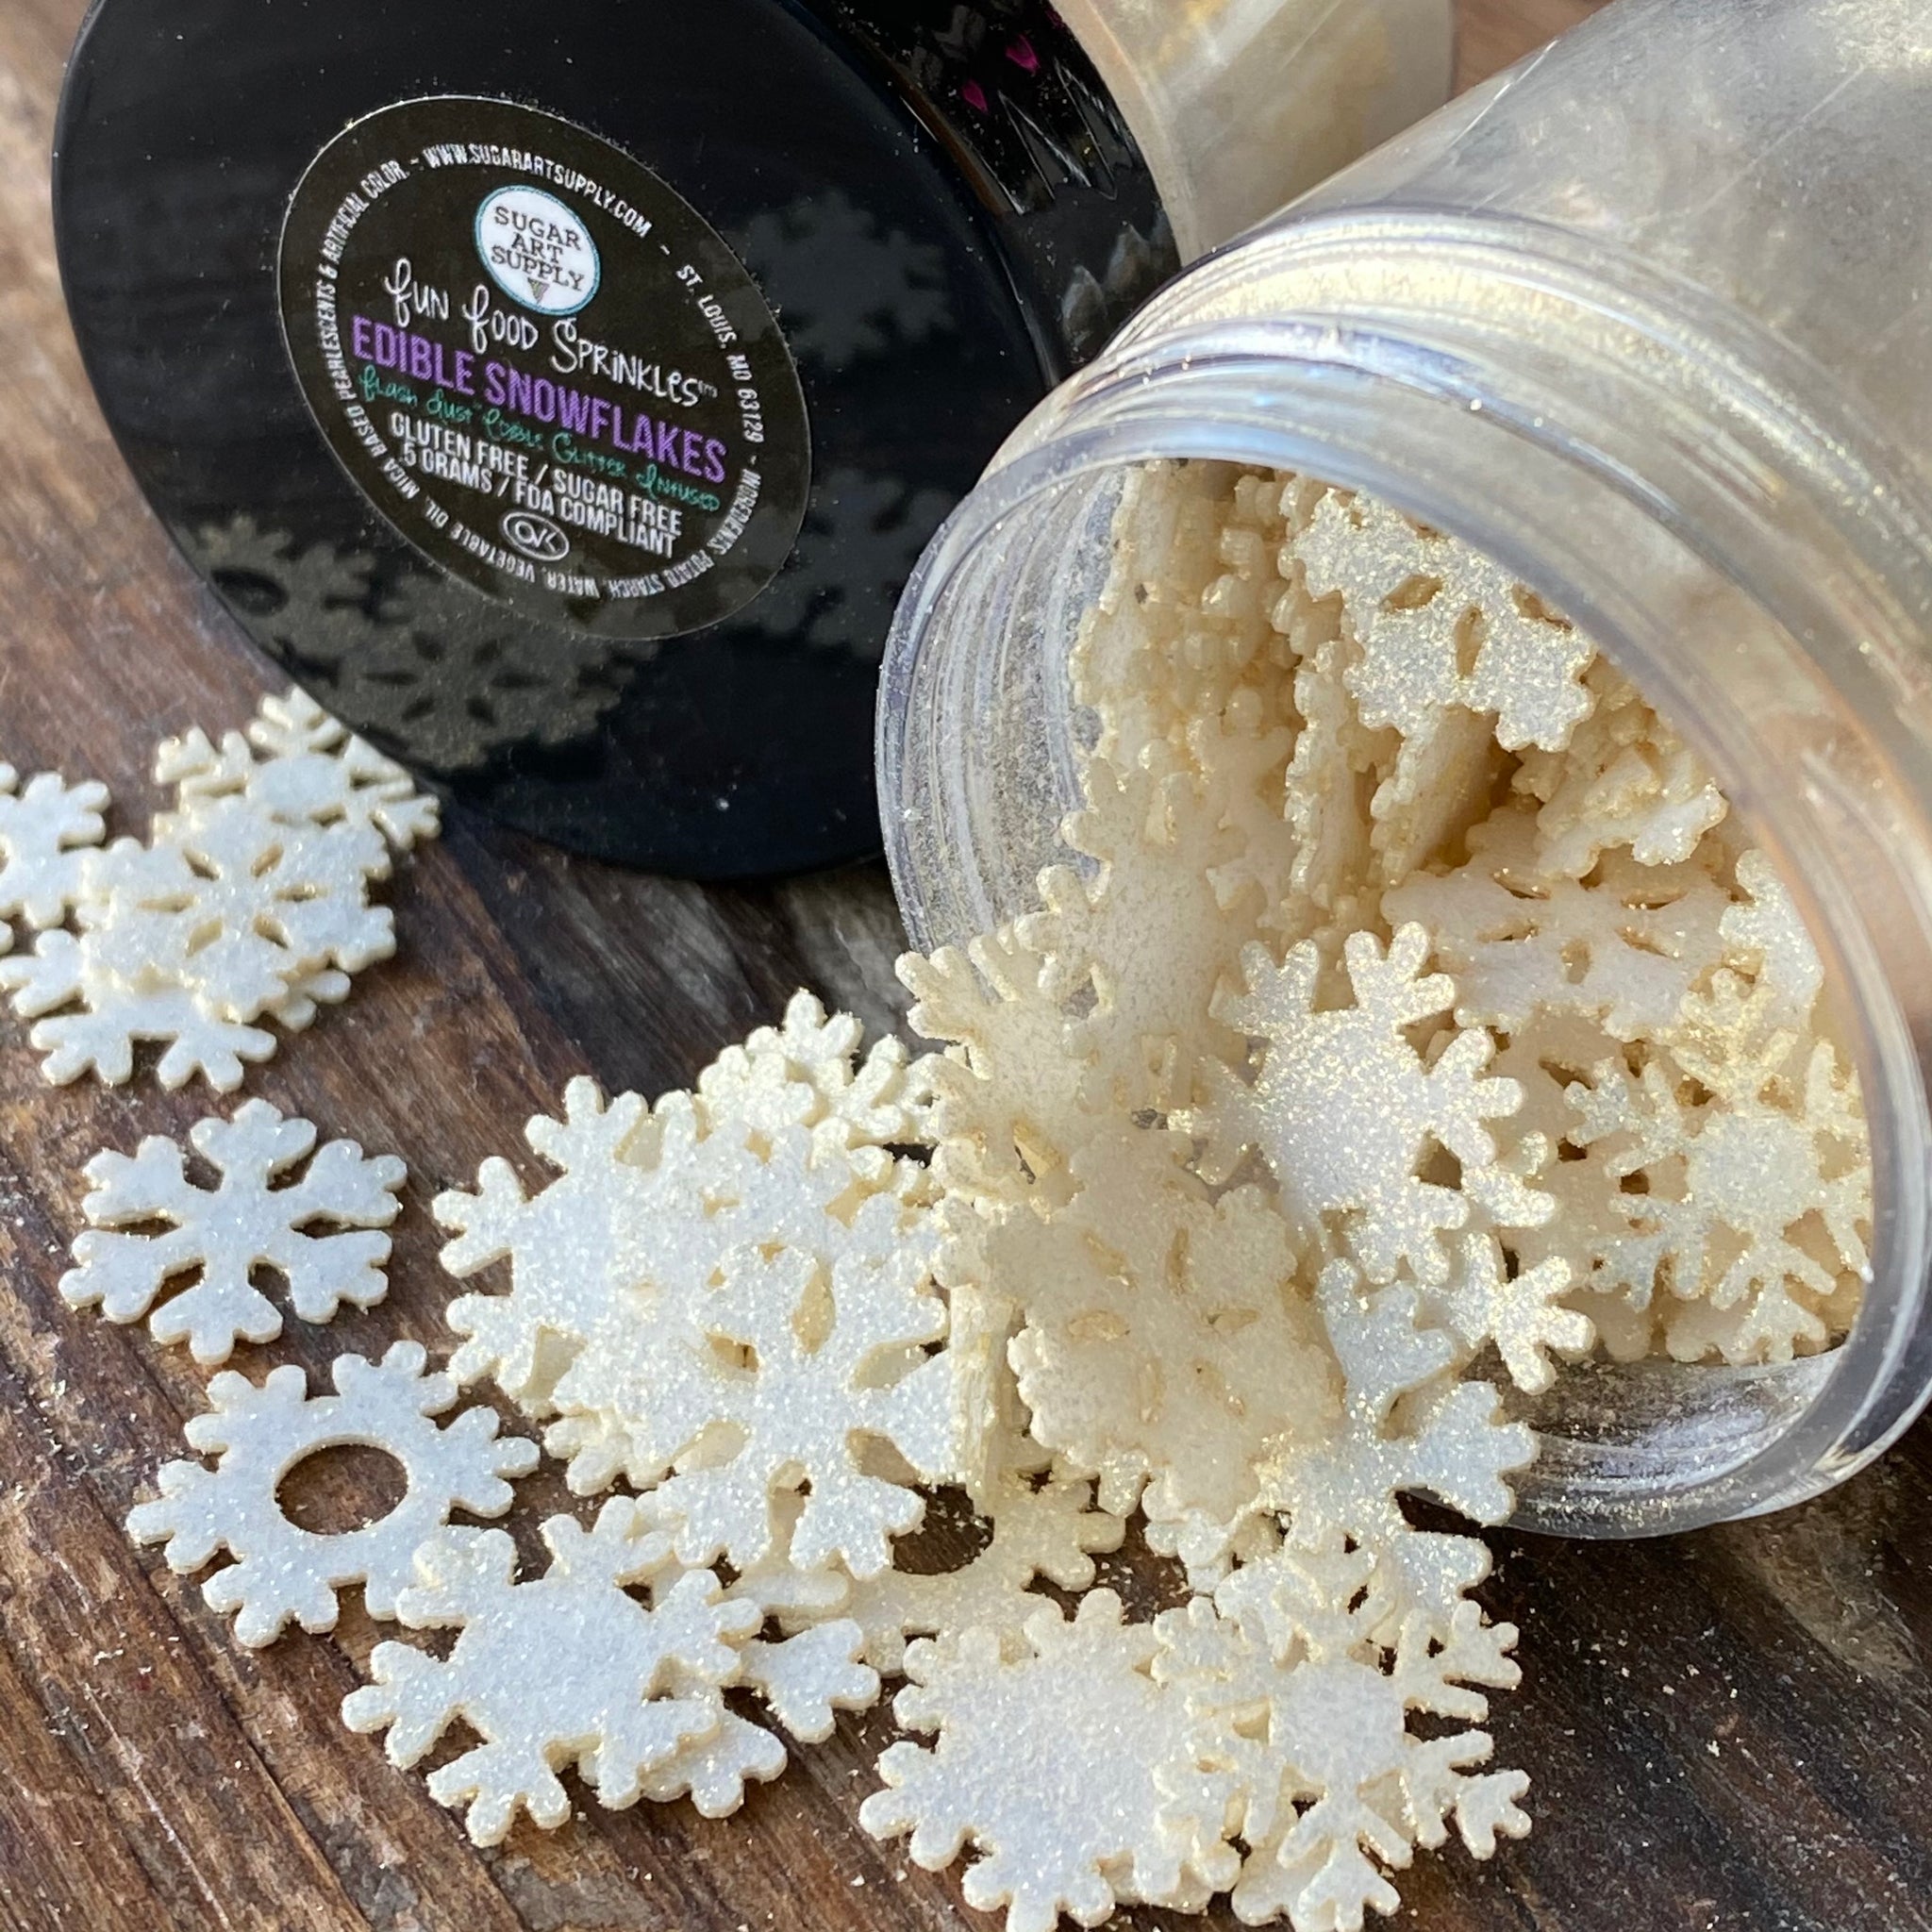 Snowflakes Candy Topping – The Sprinkles Shop